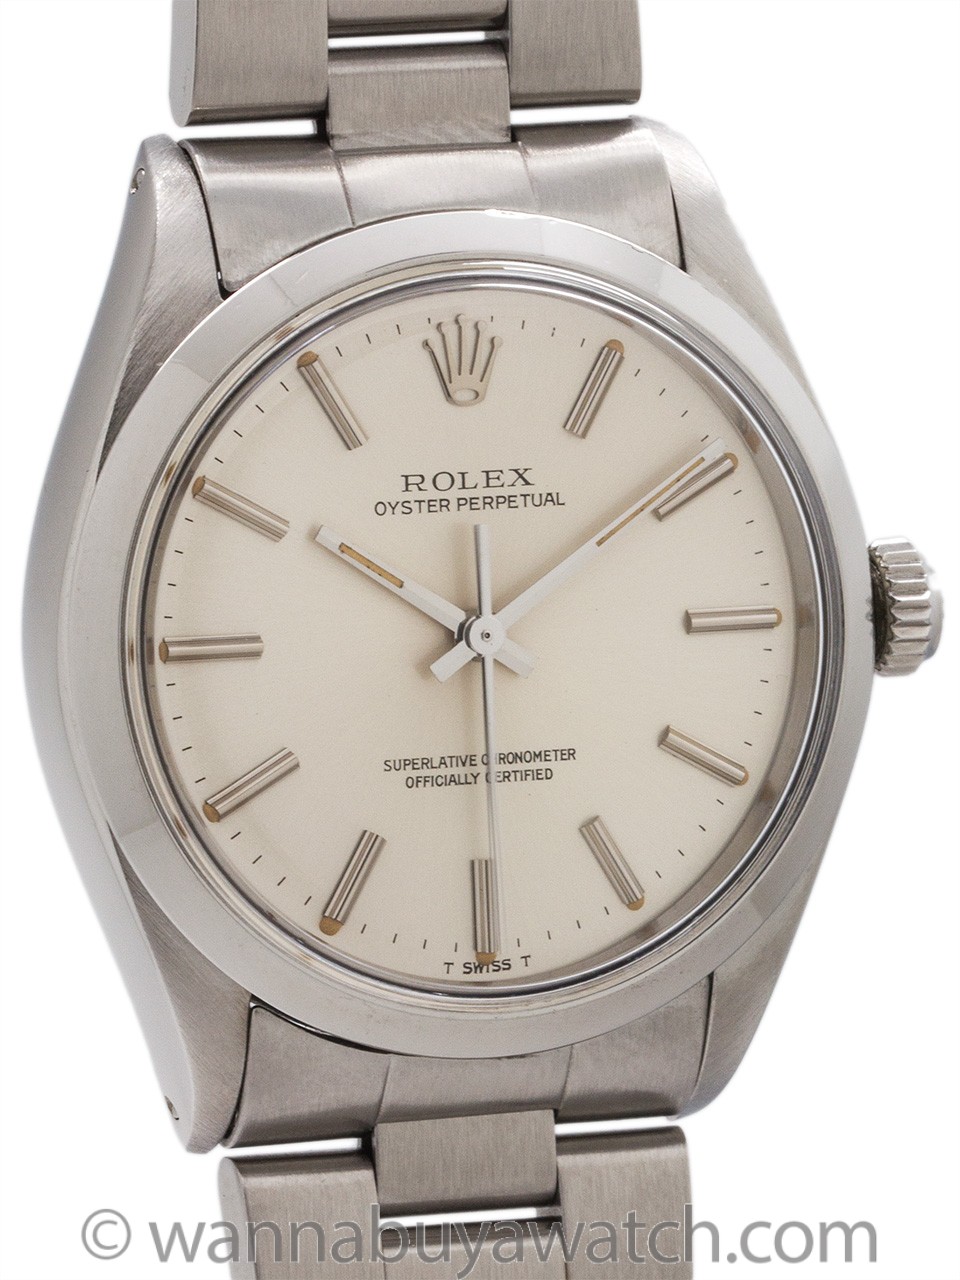 Rolex Oyster Perpetual ref 1002 